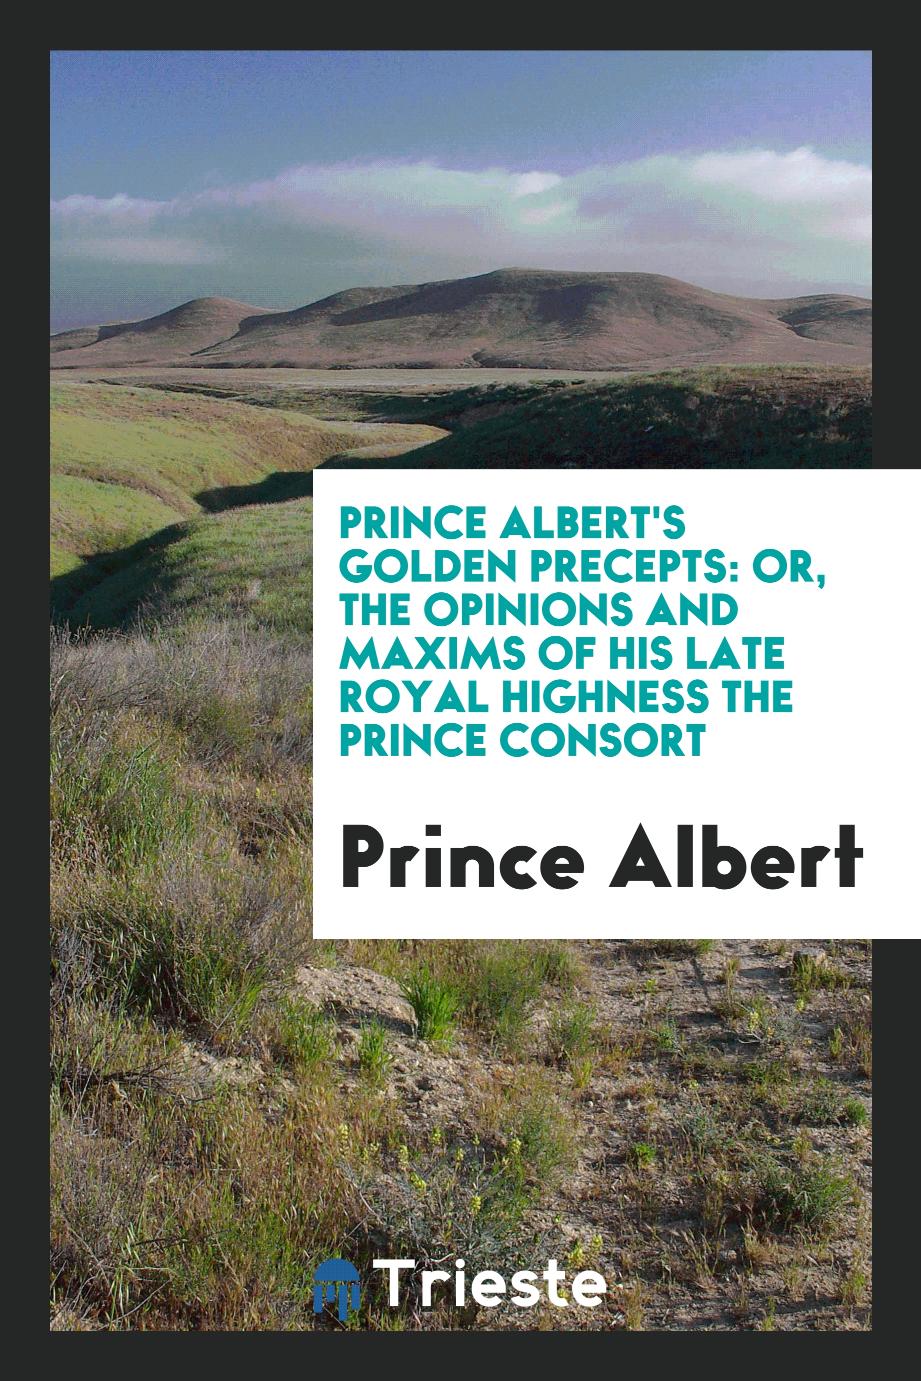 Prince Albert's Golden Precepts: Or, the Opinions and Maxims of His Late Royal Highness the Prince Consort